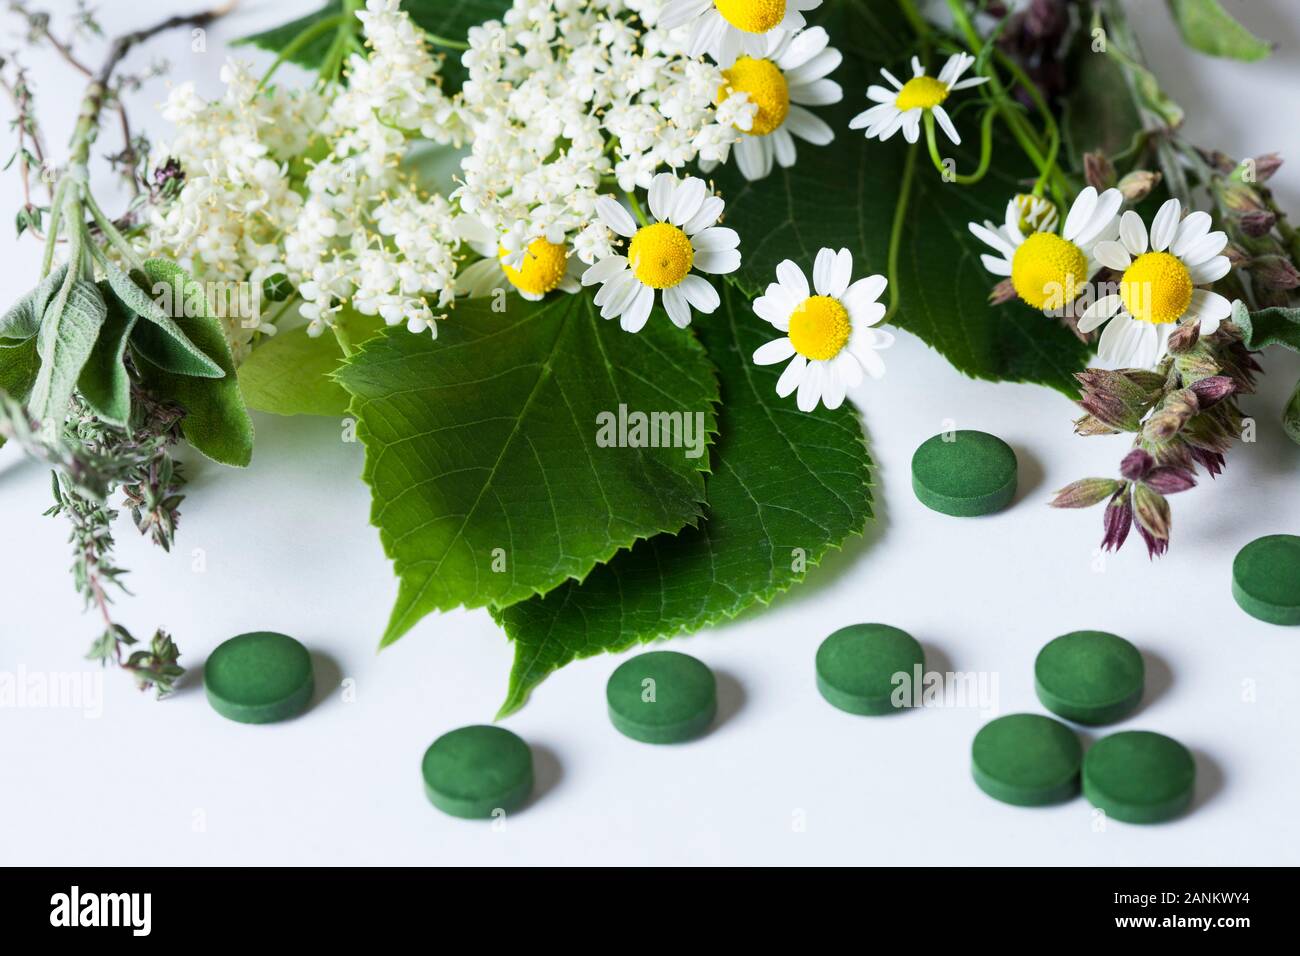 Medicinal plants and herbal remedies Stock Photo